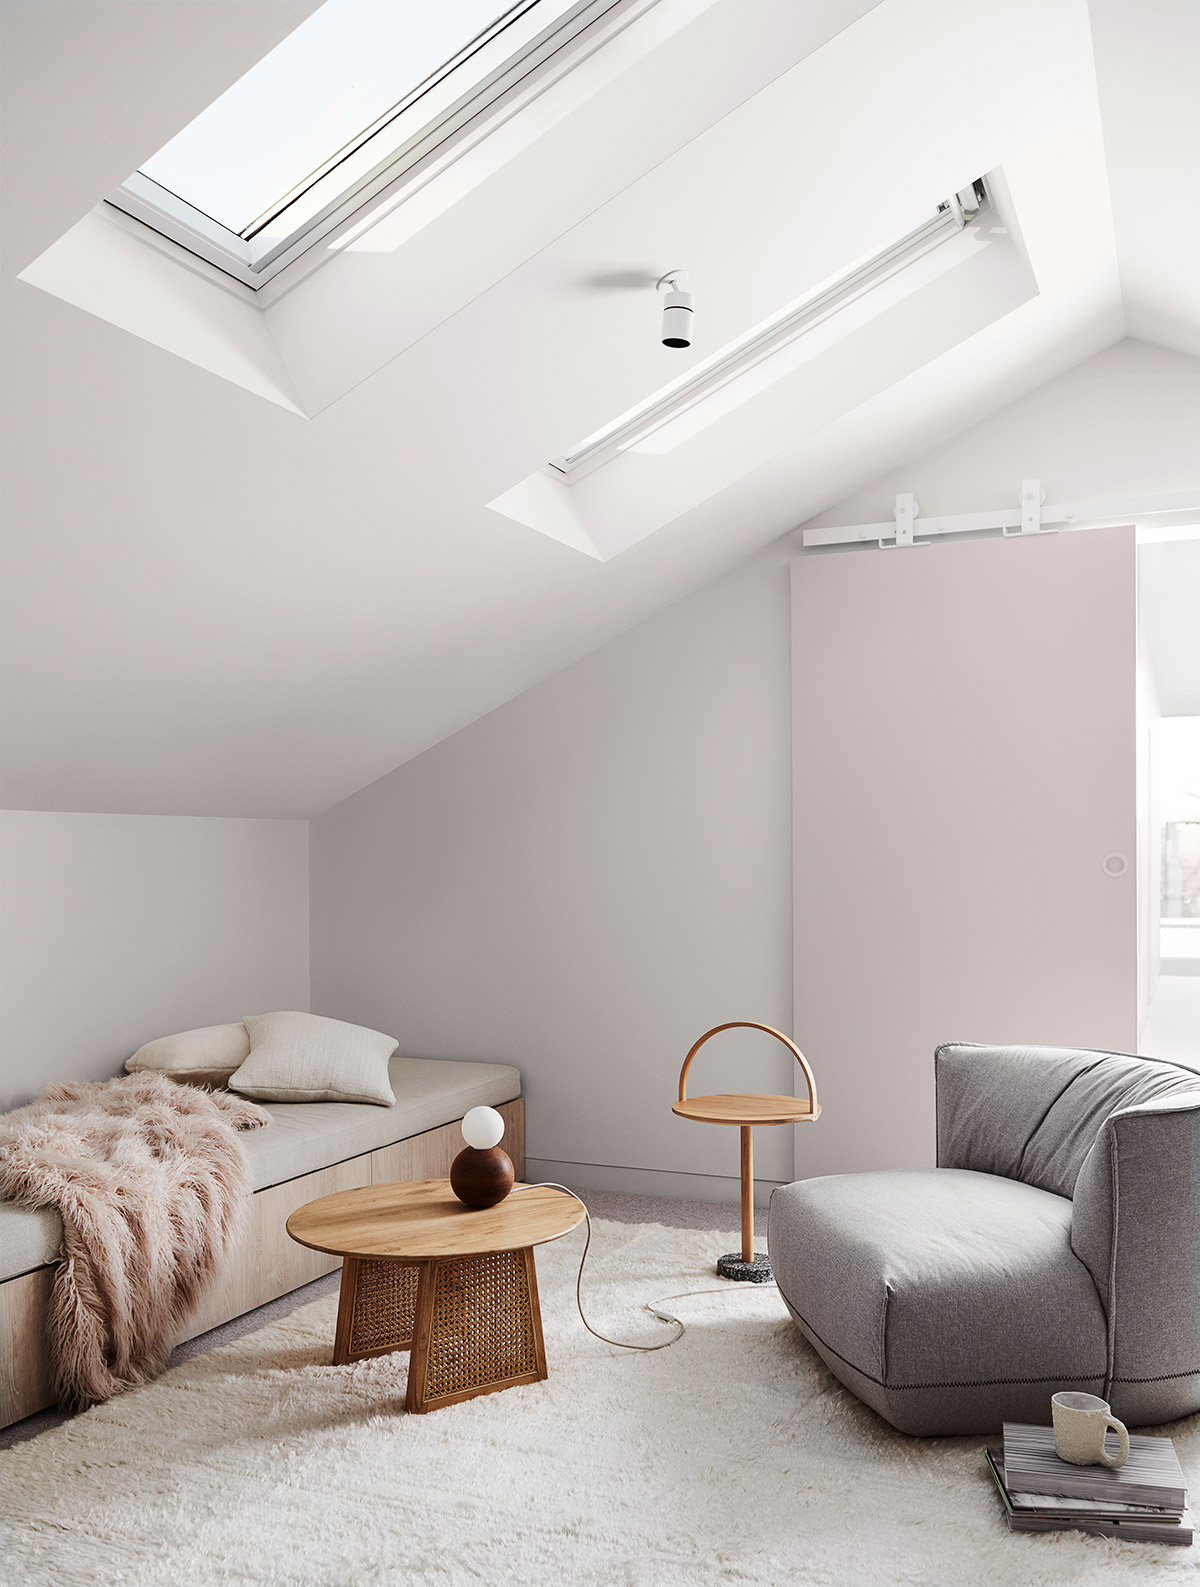 Dulux Colour Forecast 2020. Global colour trends and interiors styles.